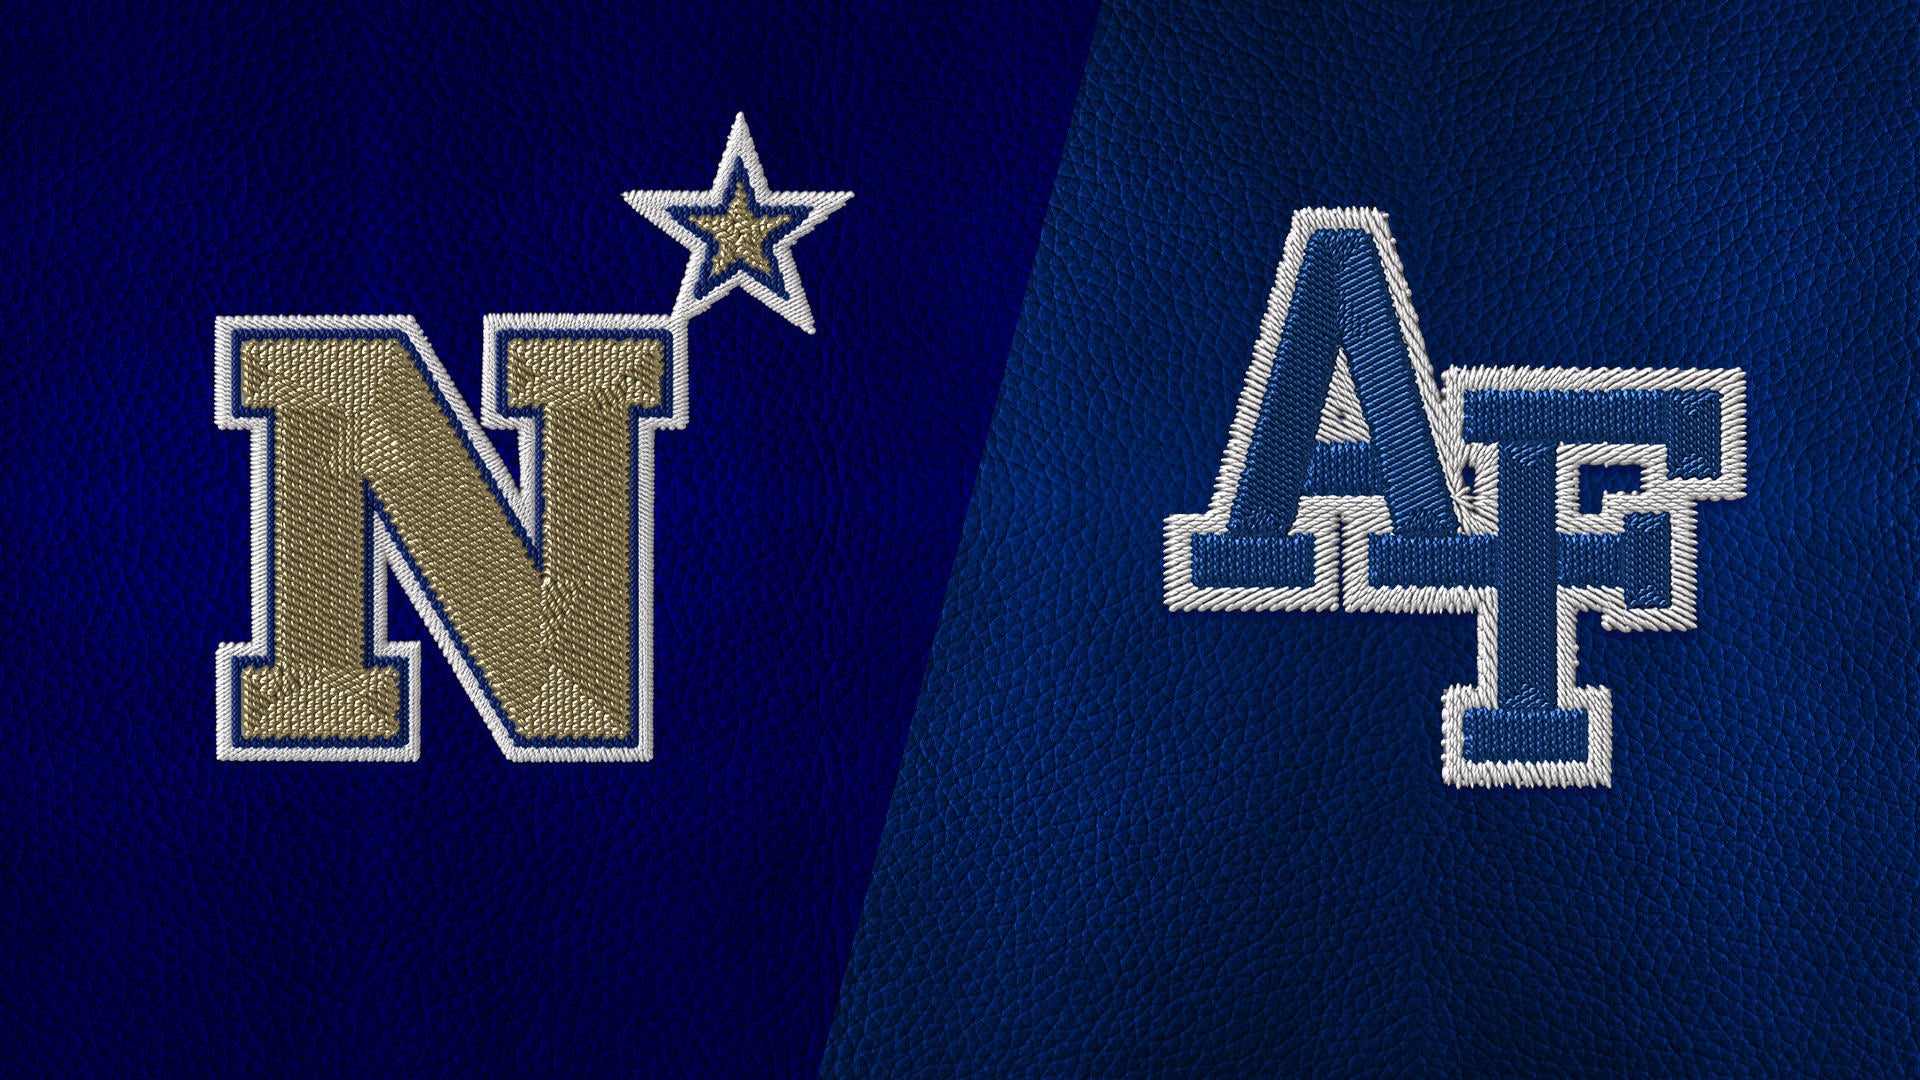 Navy vs. Air Force Live Stream of Armed Forces